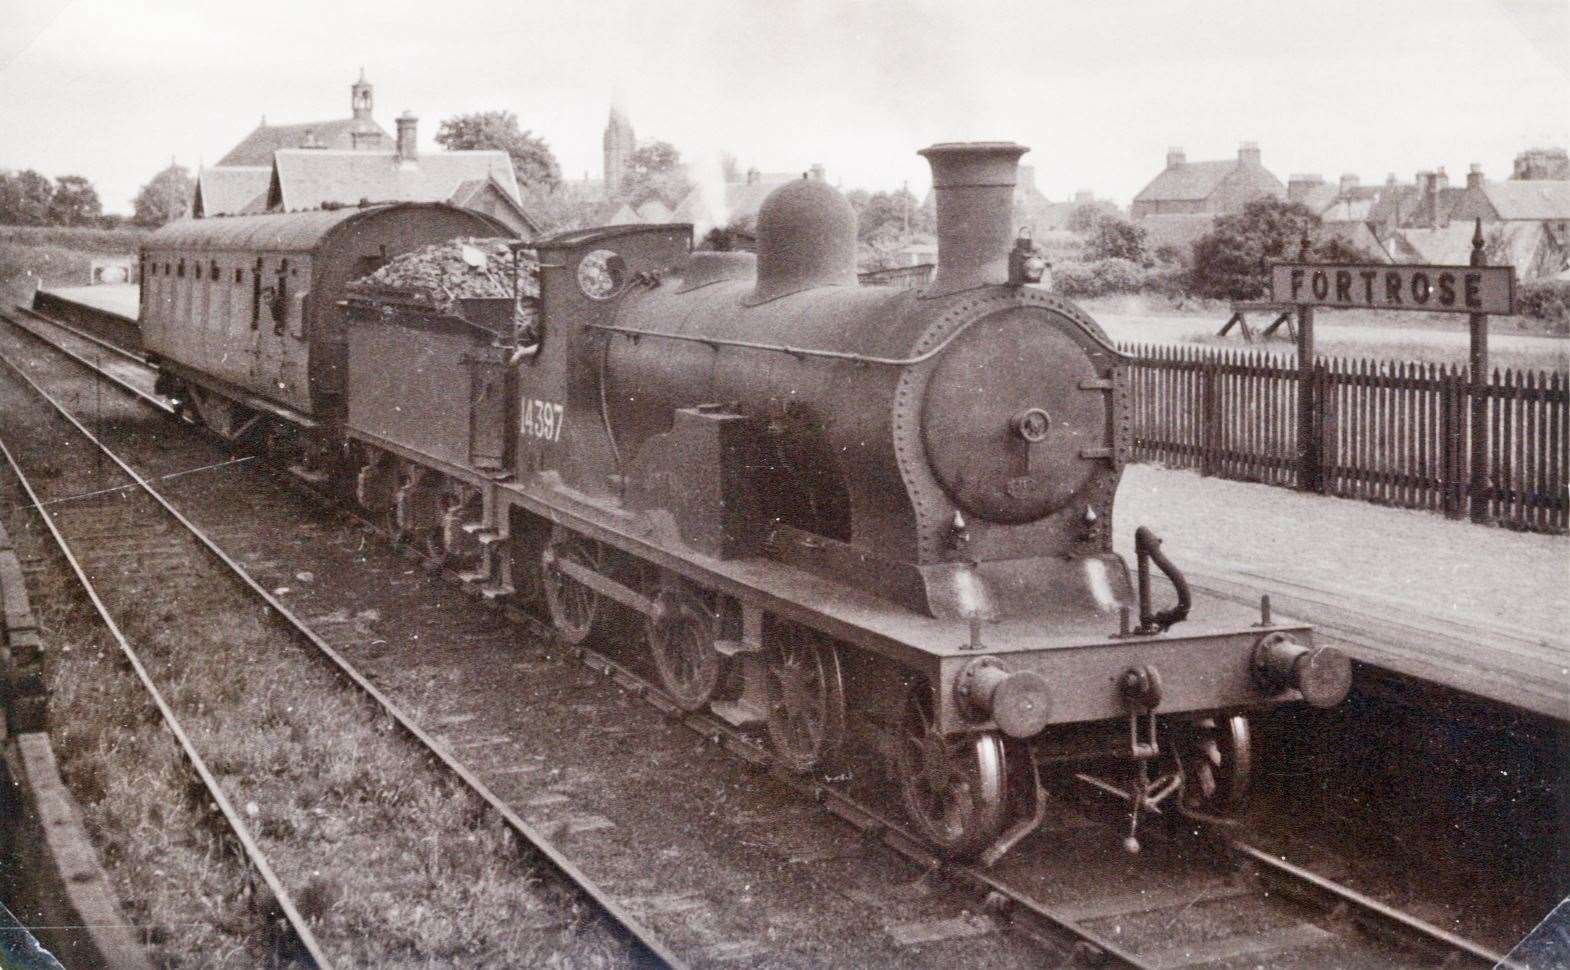 Train at Fortrose Station in 1947 [please credit image: Image courtesy of Highland Railway Society/Am Baile].